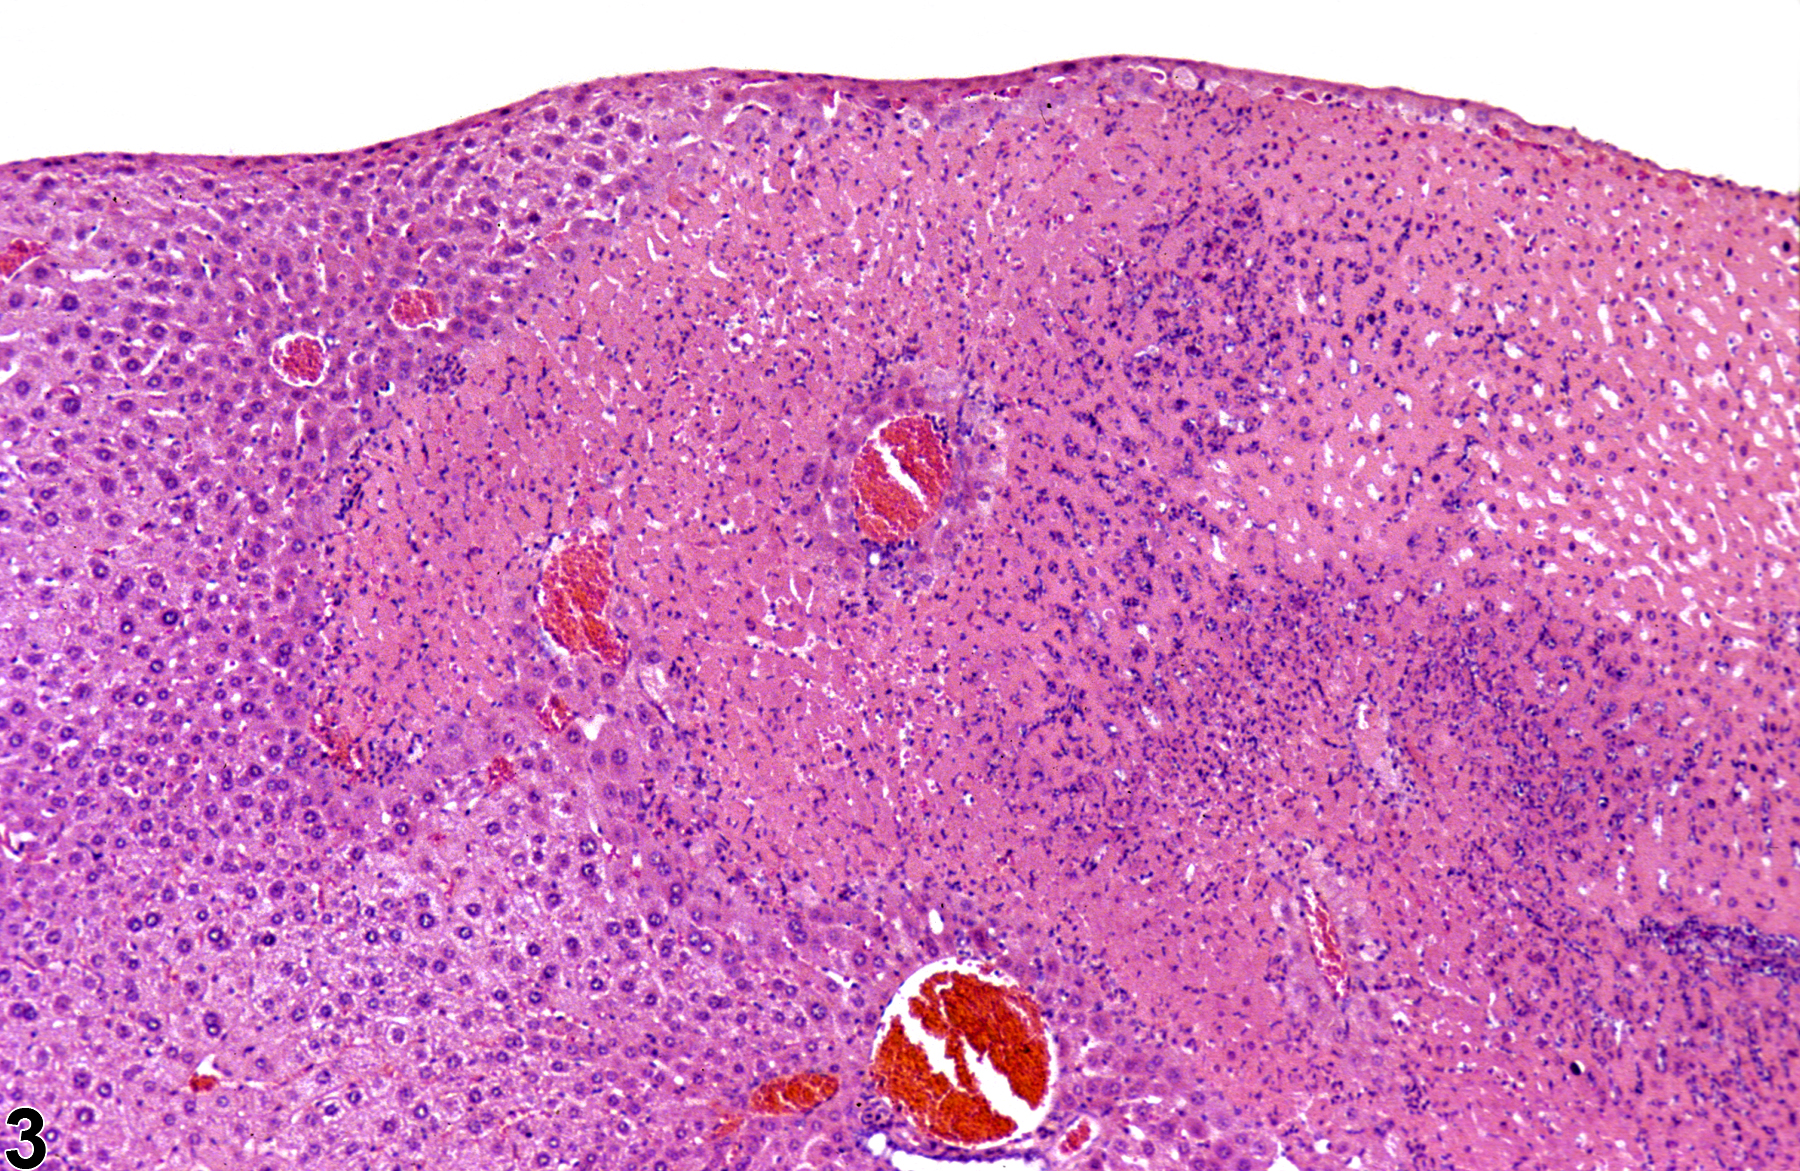 Image of necrosis in the liver from a female Swiss Webster mouse in a subchronic study